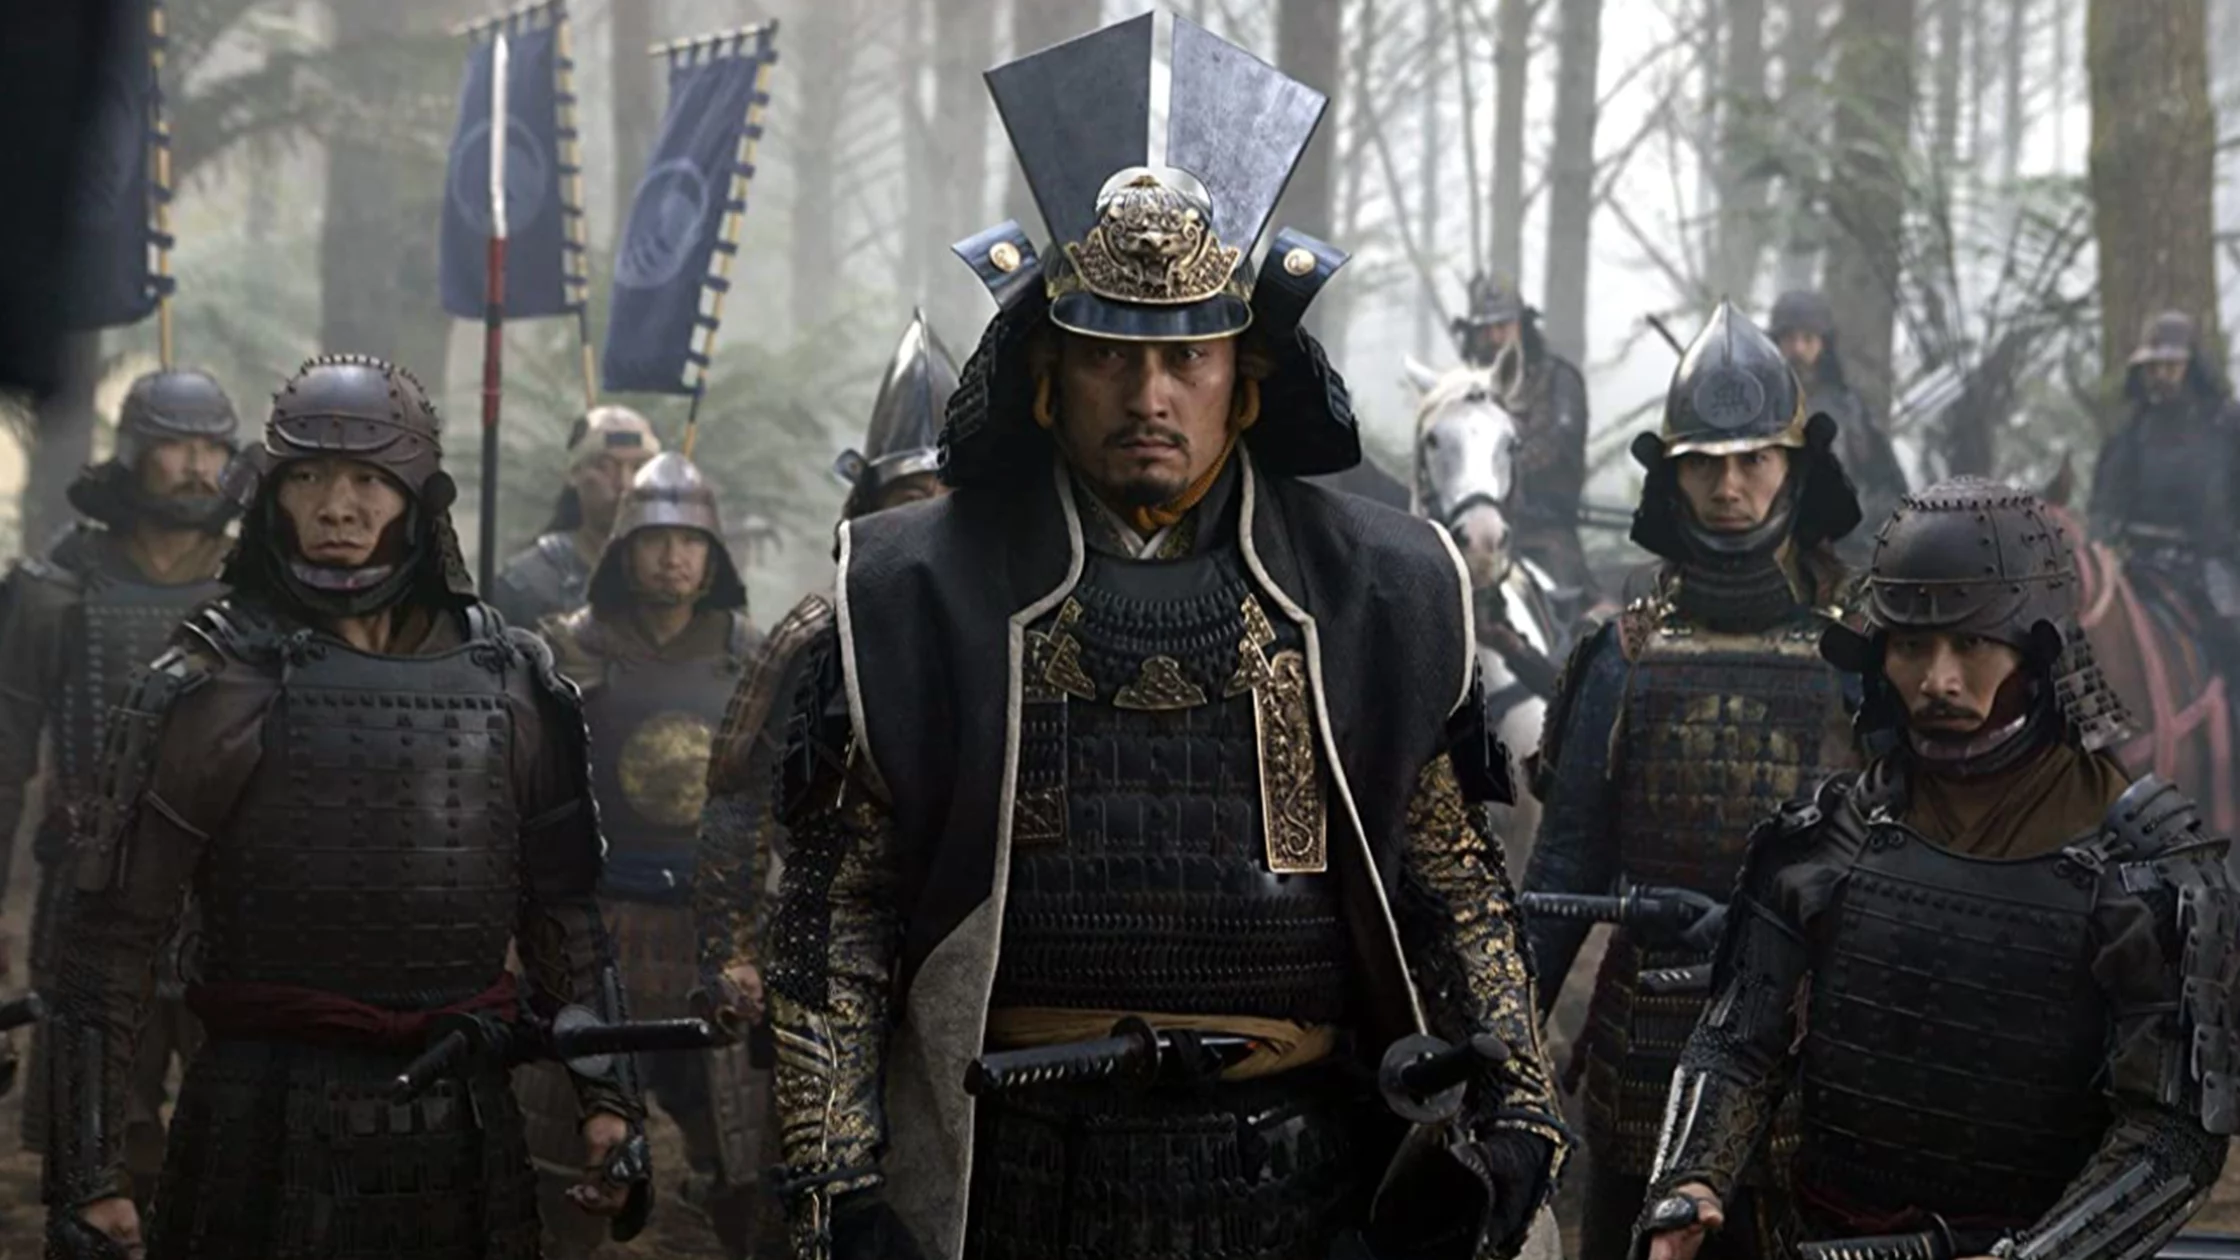 A samurai in a uniform with his army. 